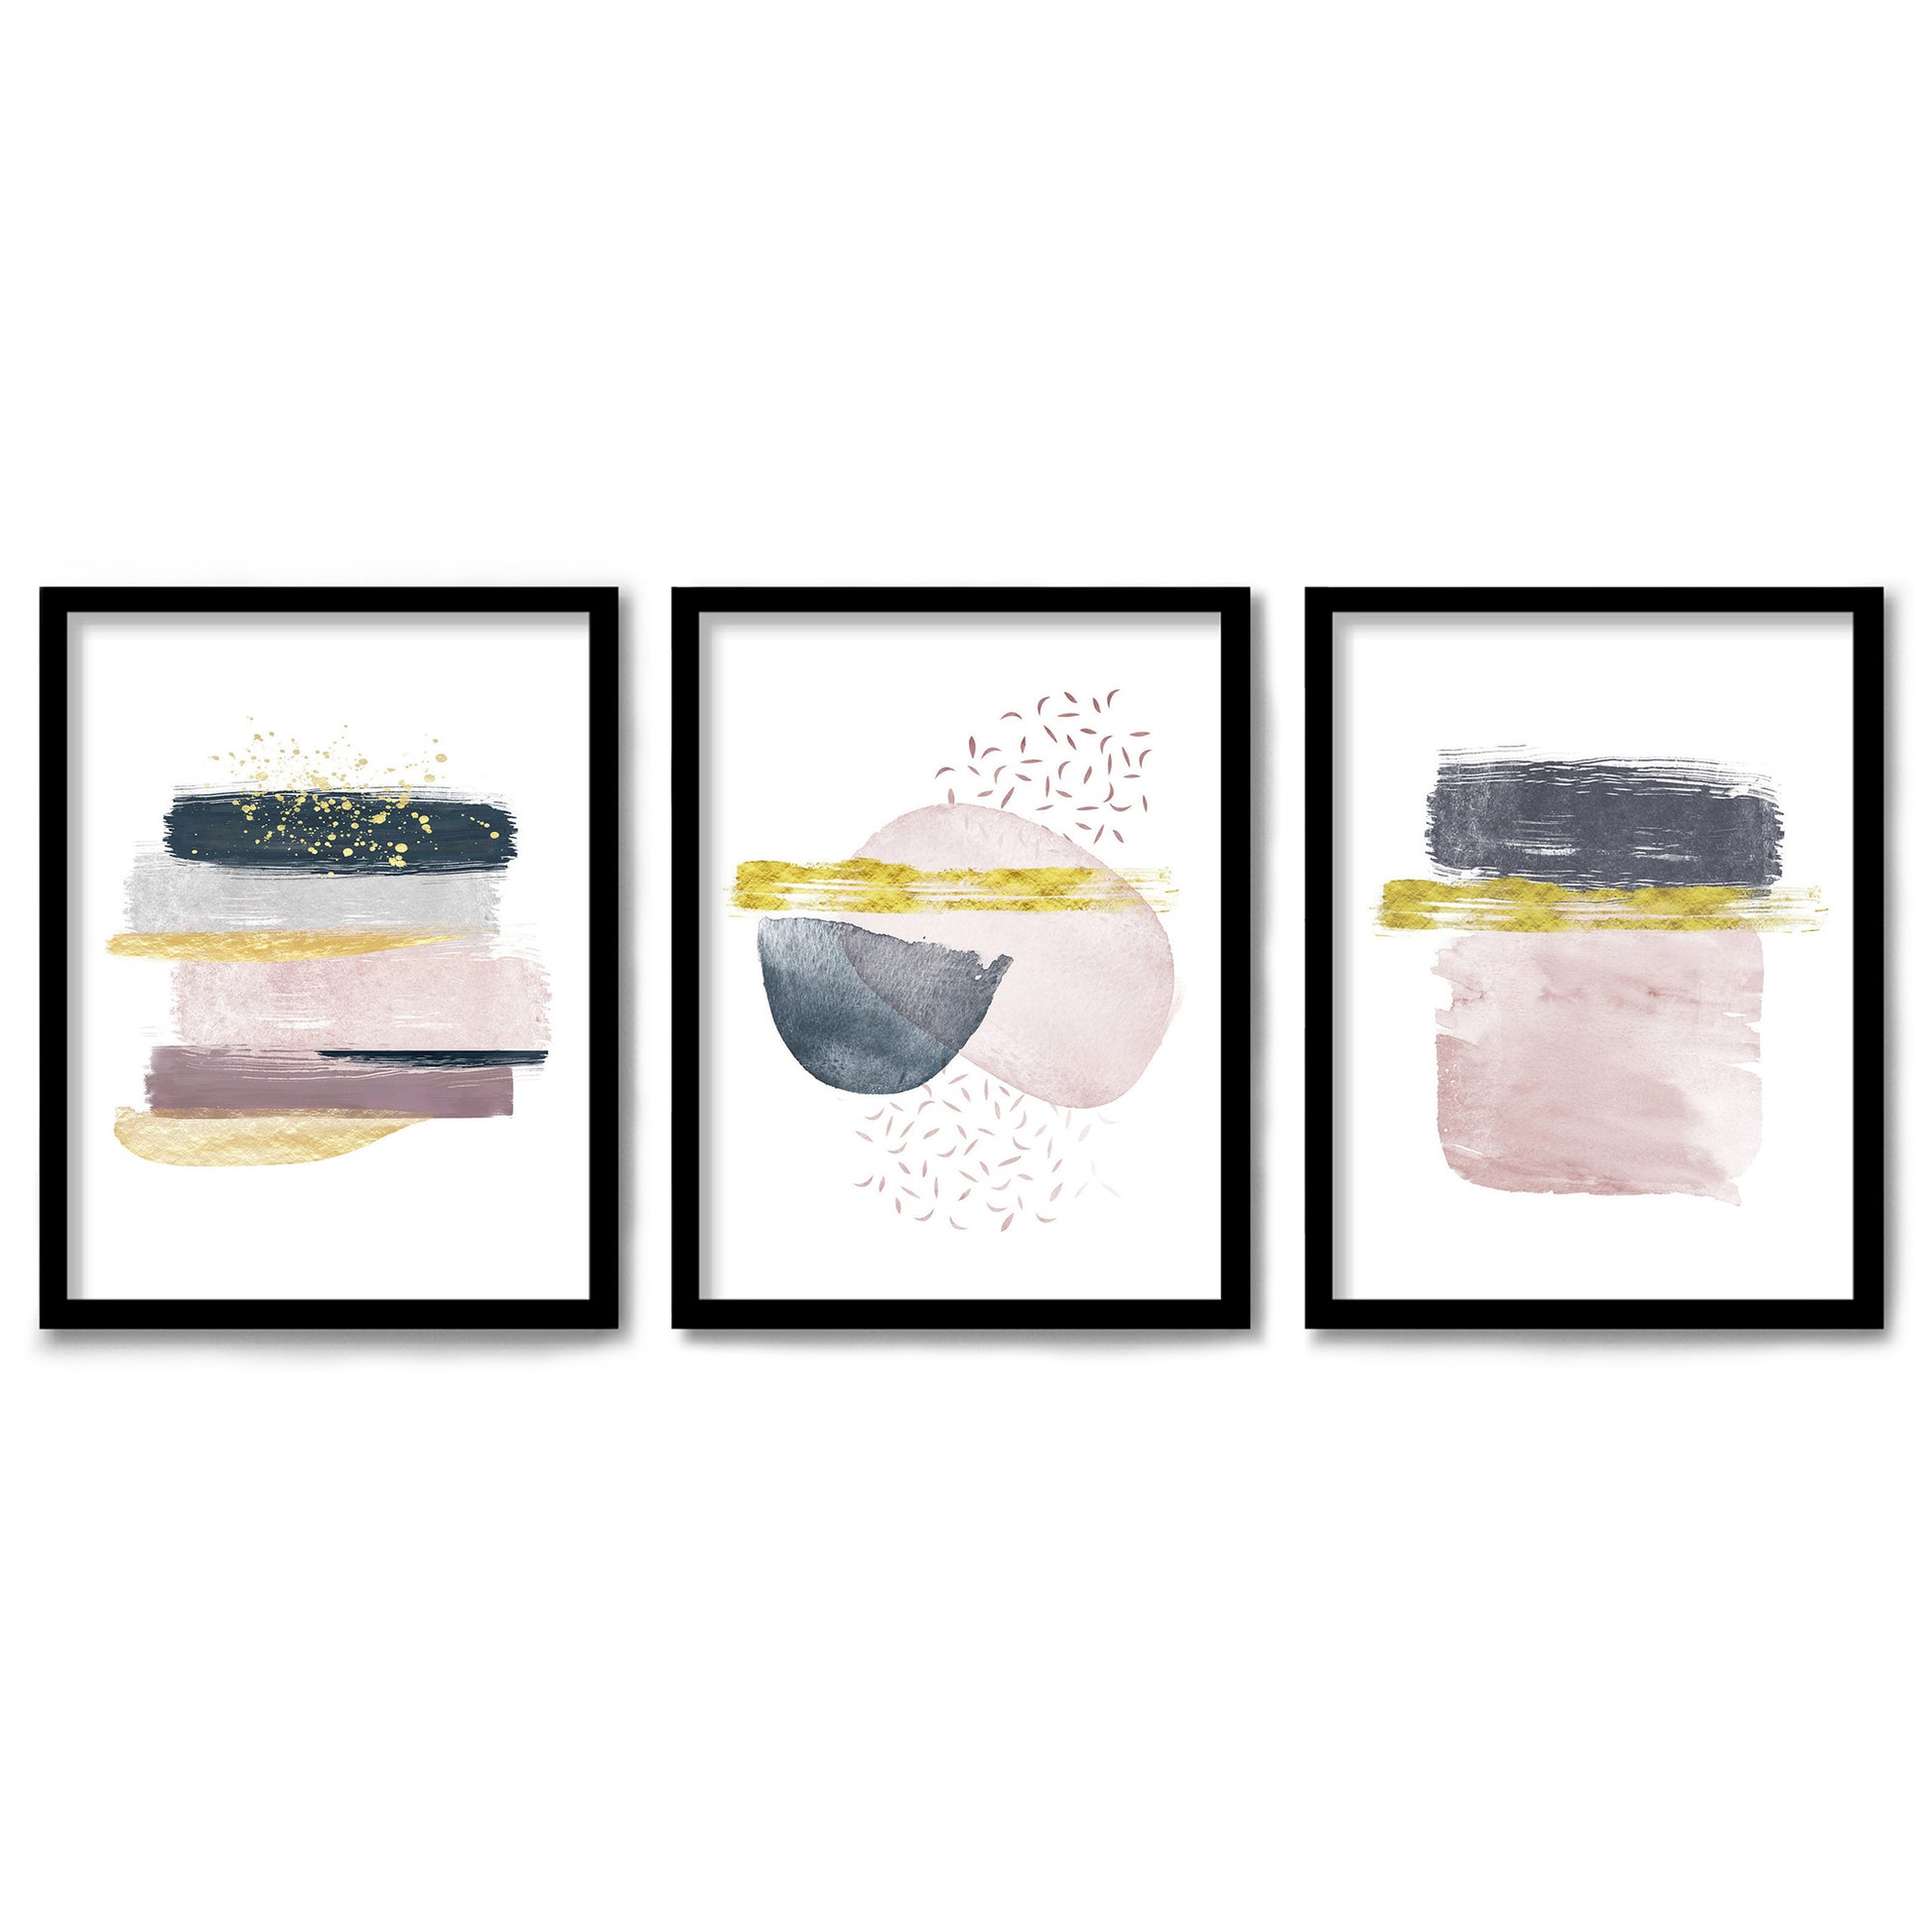 Boho Blush and Gold by Tanya Shumkina 3 Piece Framed Triptych 